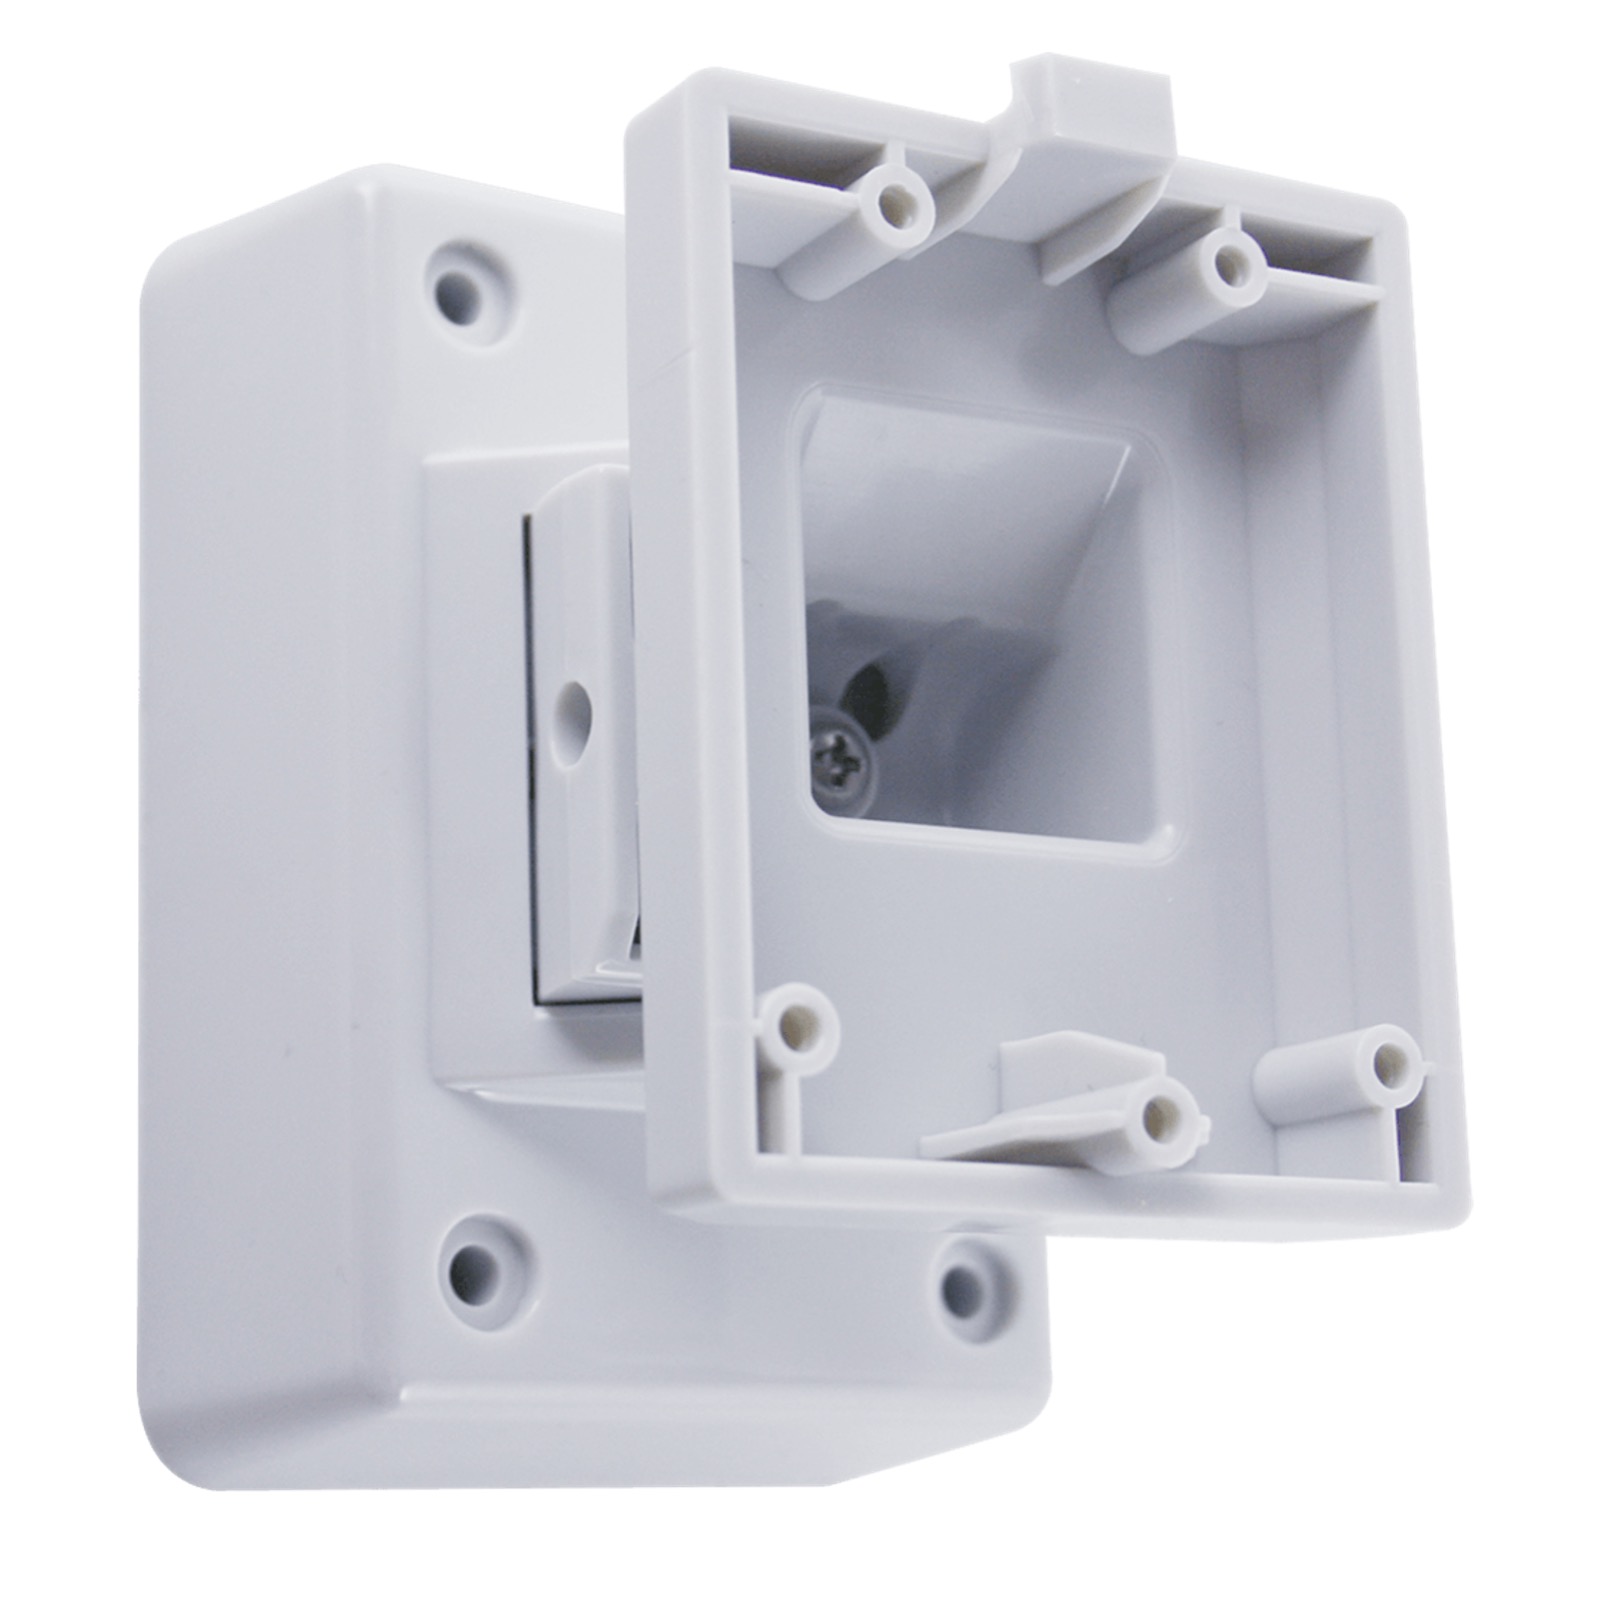 Internal bracket for Axiom Hikvision ceiling mounting